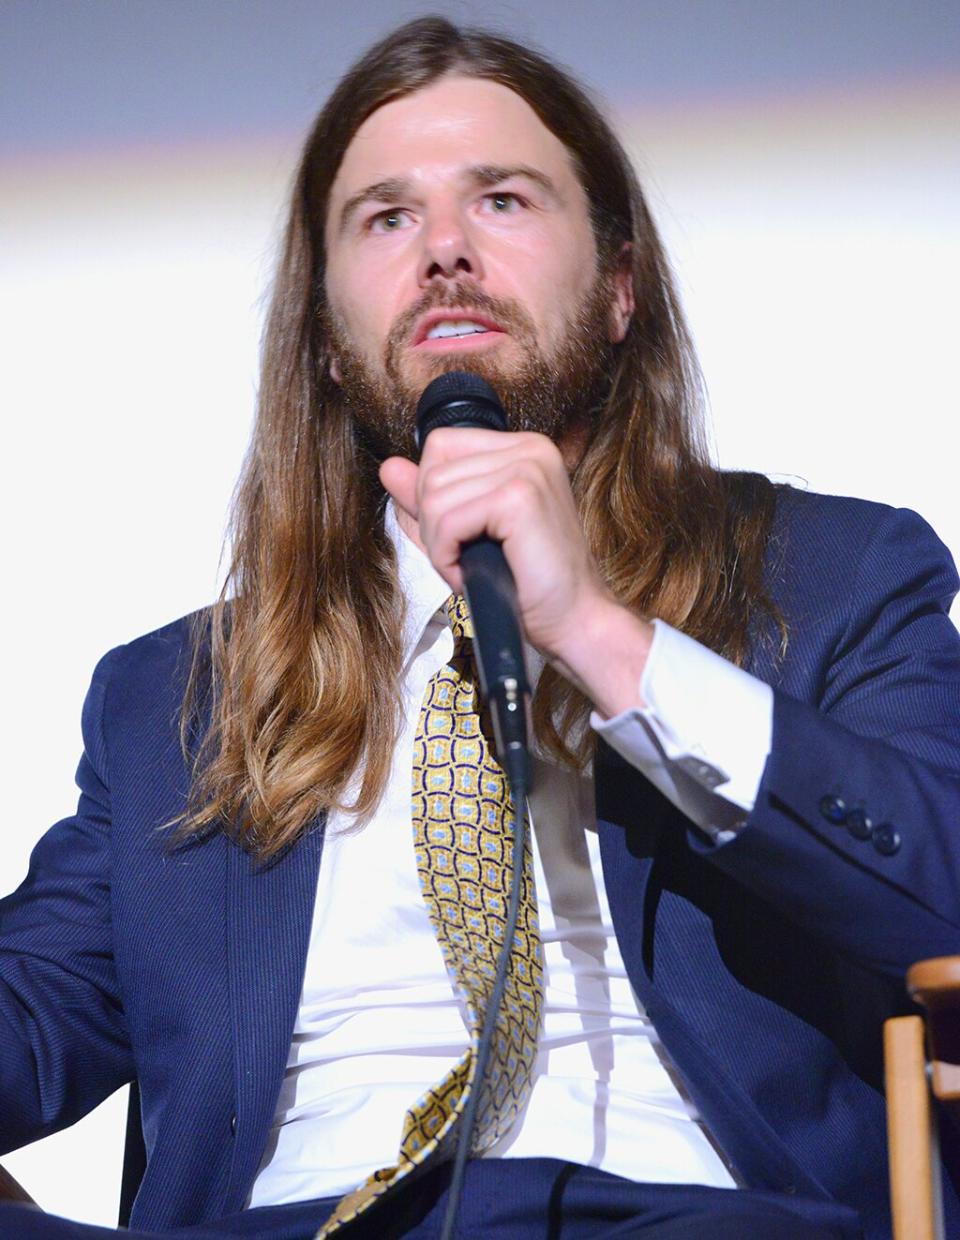 Dan Price speaks during the Q &amp; A portion of the Premiere Of "Unbreakable: The Steve Zakuani Story" held at TCL Chinese 6 Theatres on June 11, 2019